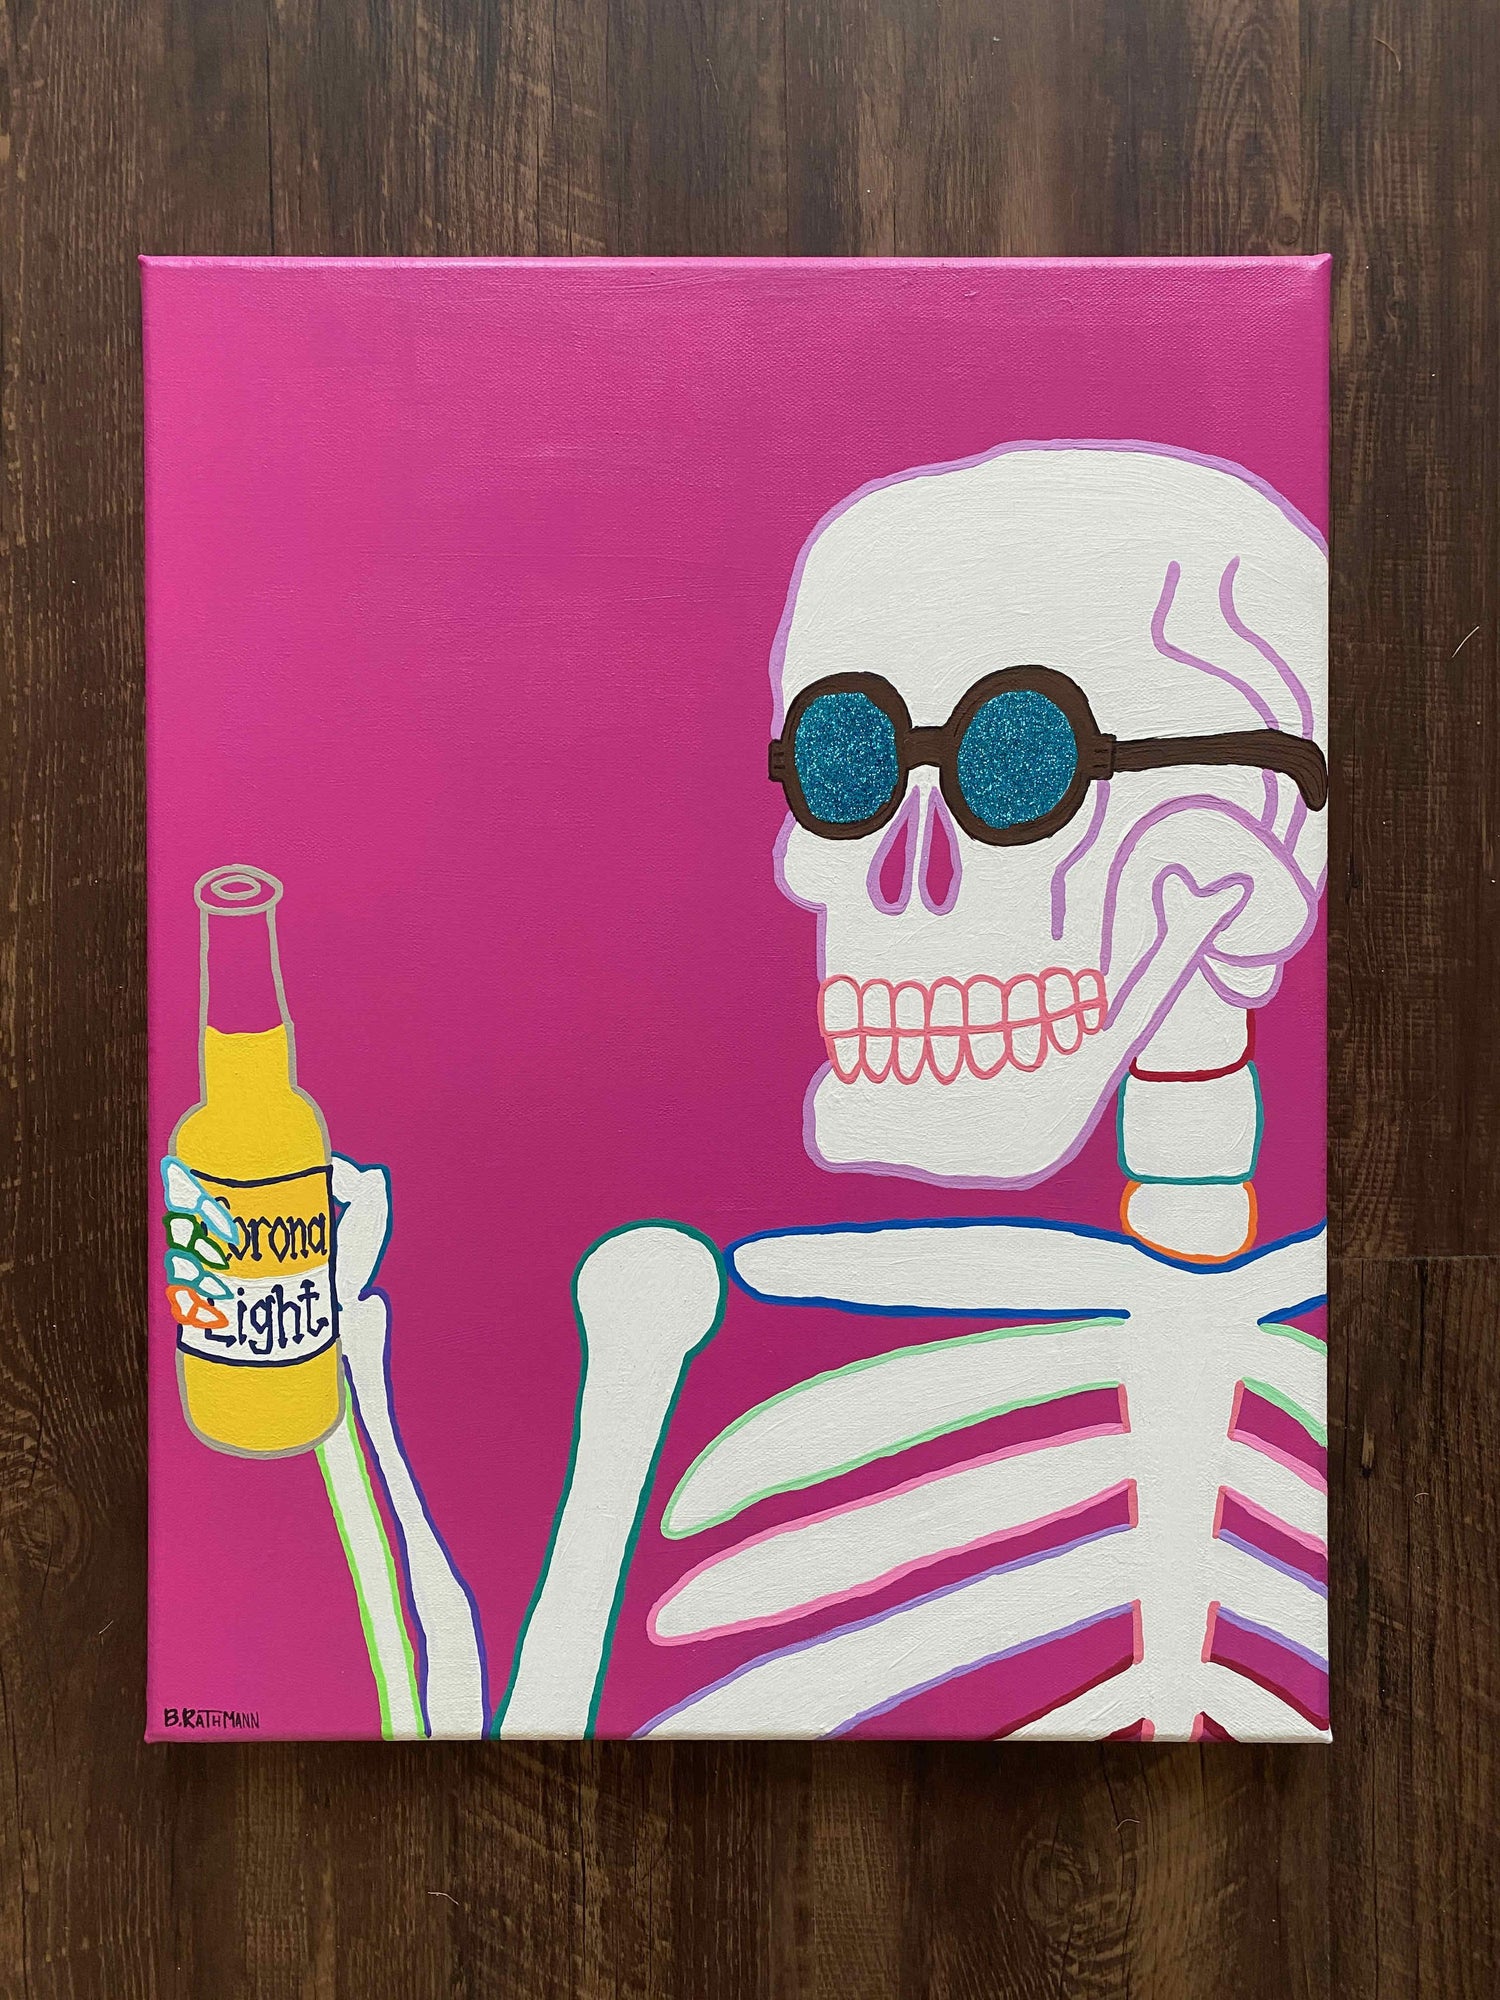 Funky Skeleton is an acrylic painting of a rad skeleton on an 16"X20" canvas. This original painting is perfect for any space. This work was inspired by my love for color and corona light.